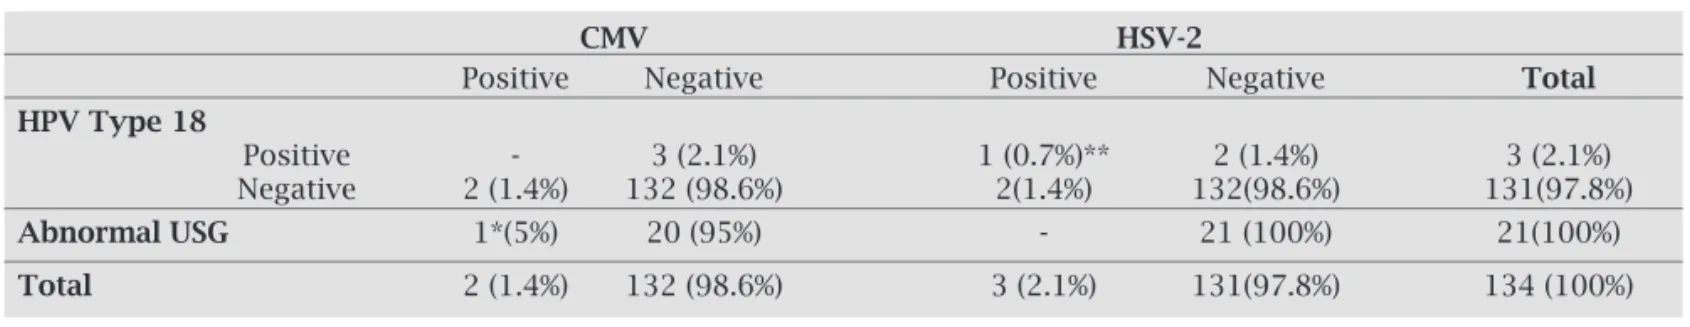 Table 2. One of two CMV positive pregnants had abnormal ultrasonographic finding. CMV DNA was negative  for HPV type 18 positive 3 pregnants, while one of 3 was detected positive for HSV-2